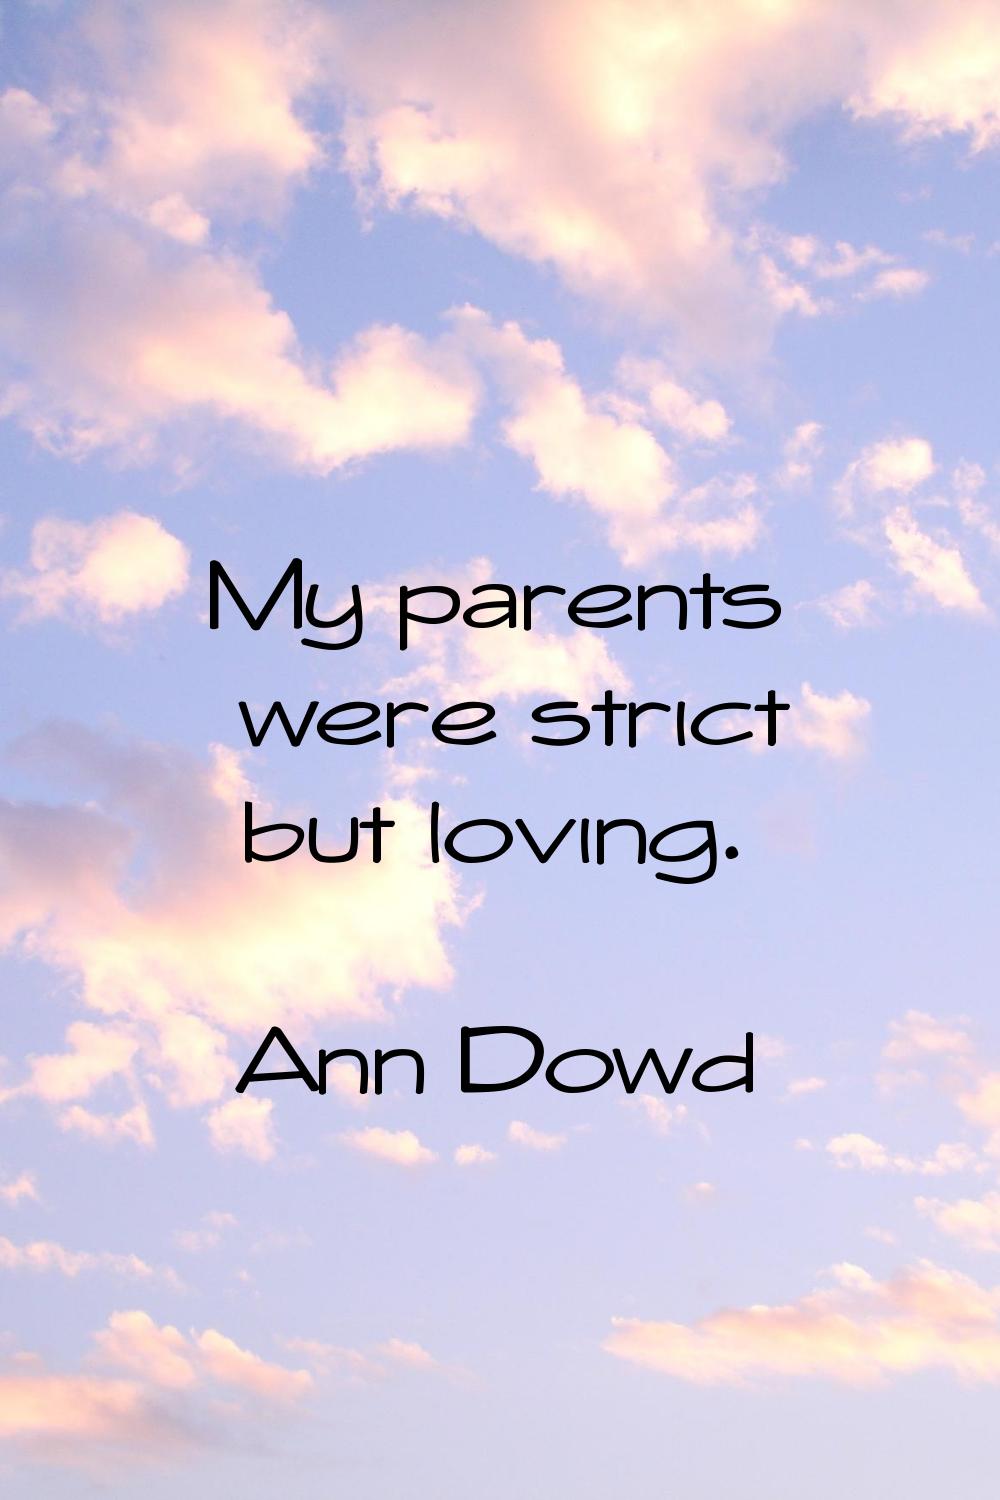 My parents were strict but loving.